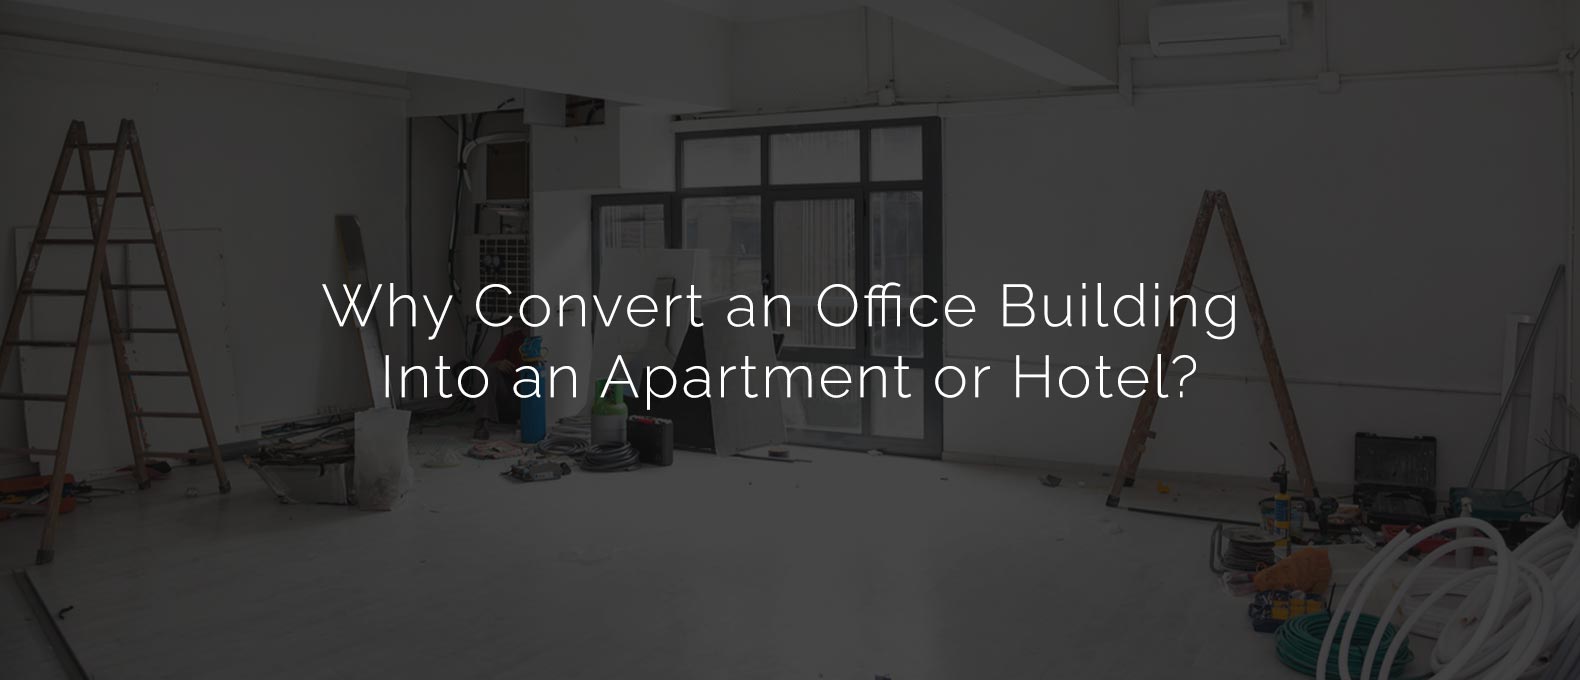 Why Convert an Office Building Into an Apartment or Hotel